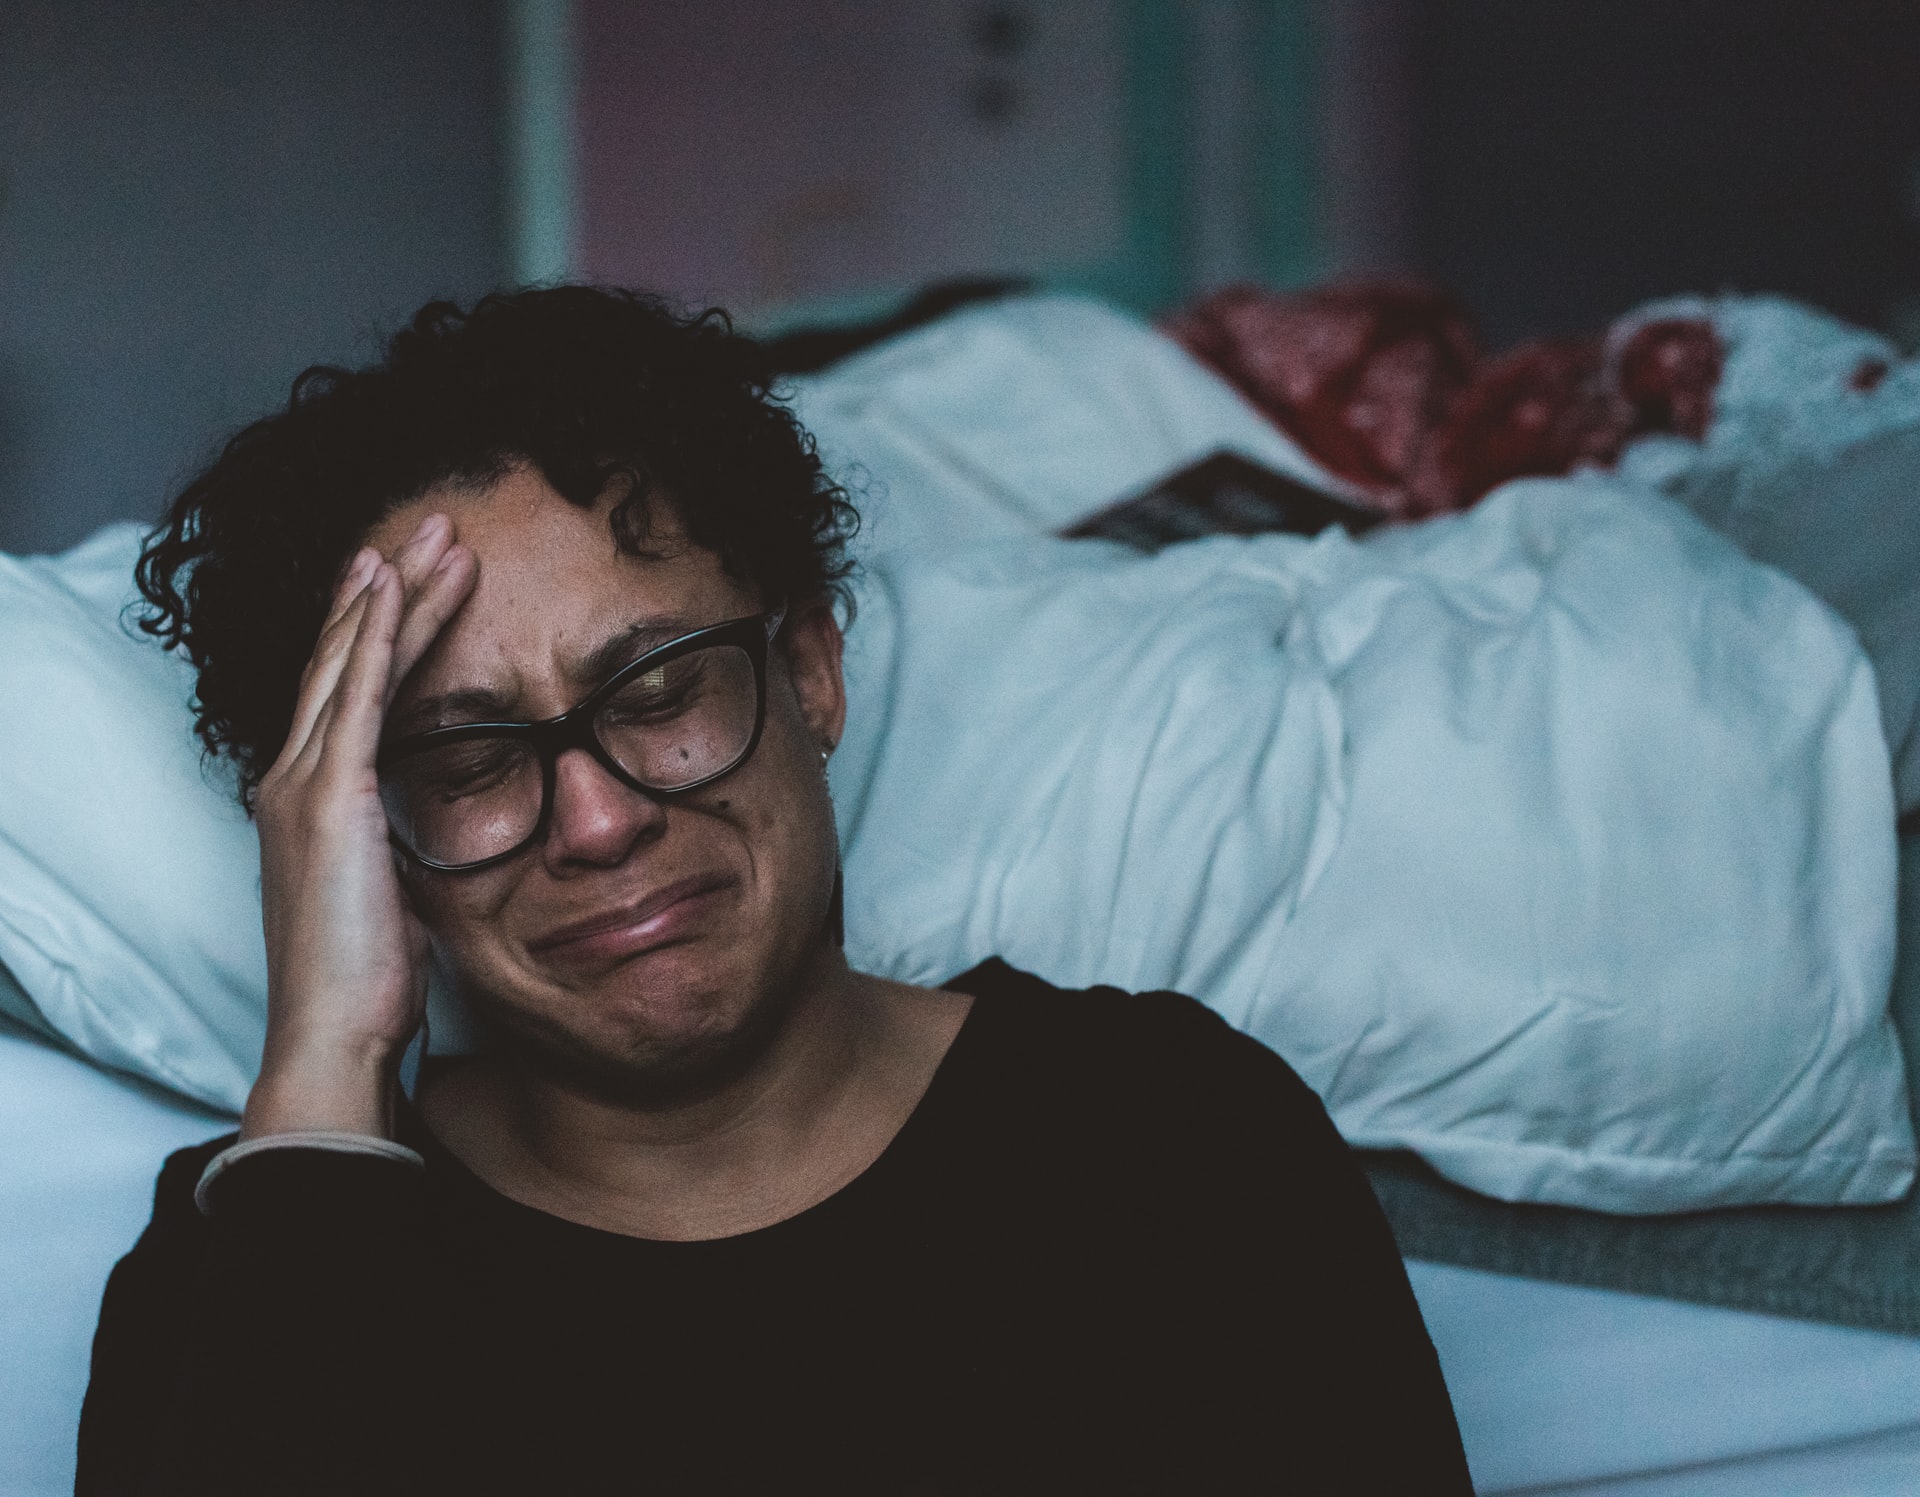 A woman in glasses is weeping in stressed conditions